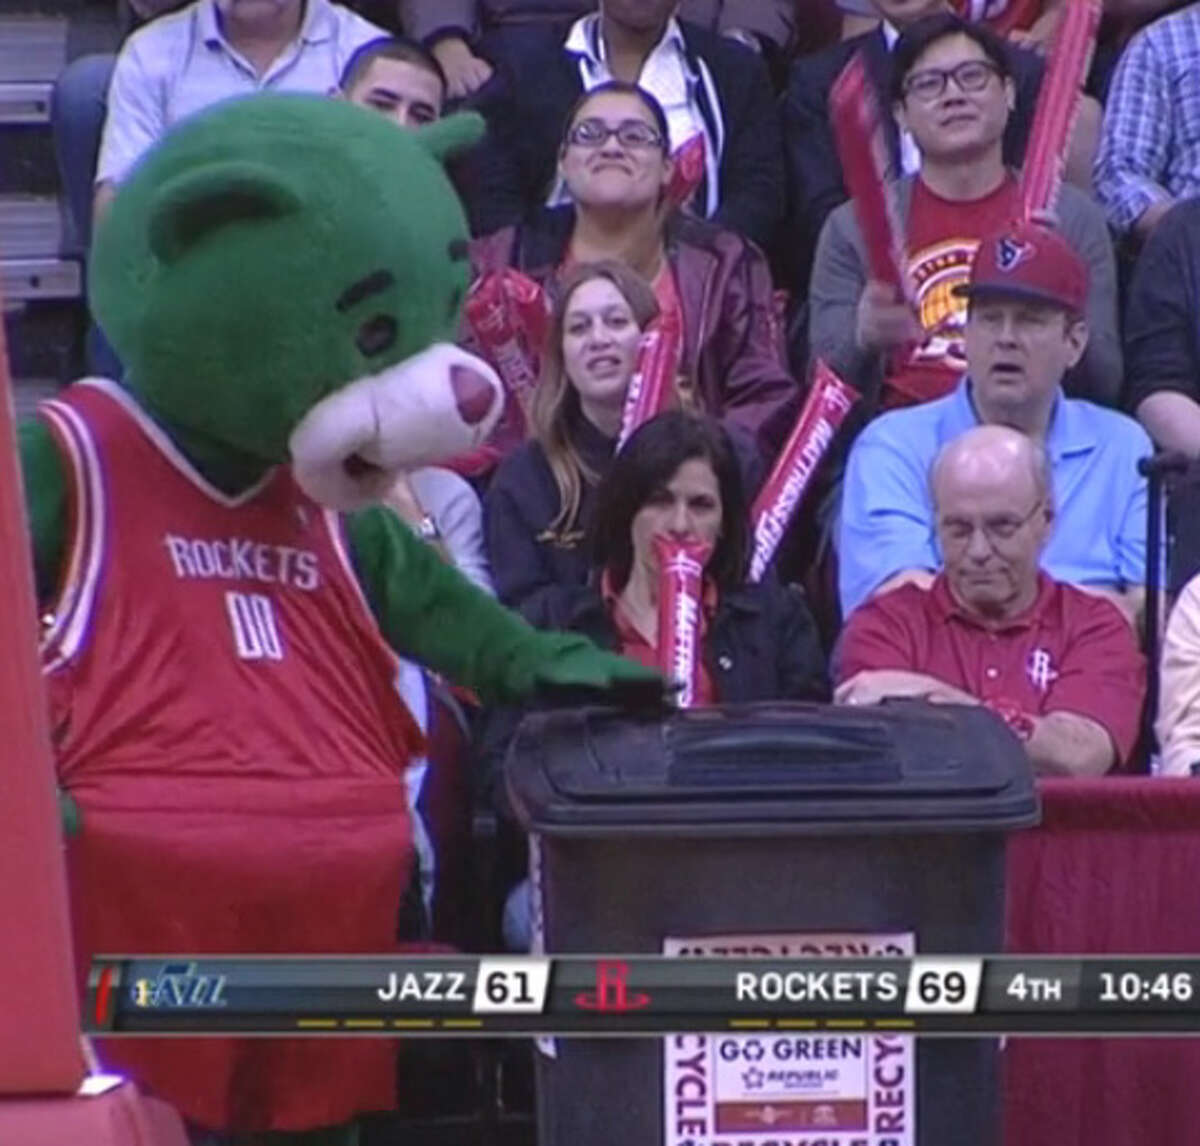 The Houston Rockets came up with another innovative way to distract opponents at the free-throw line.